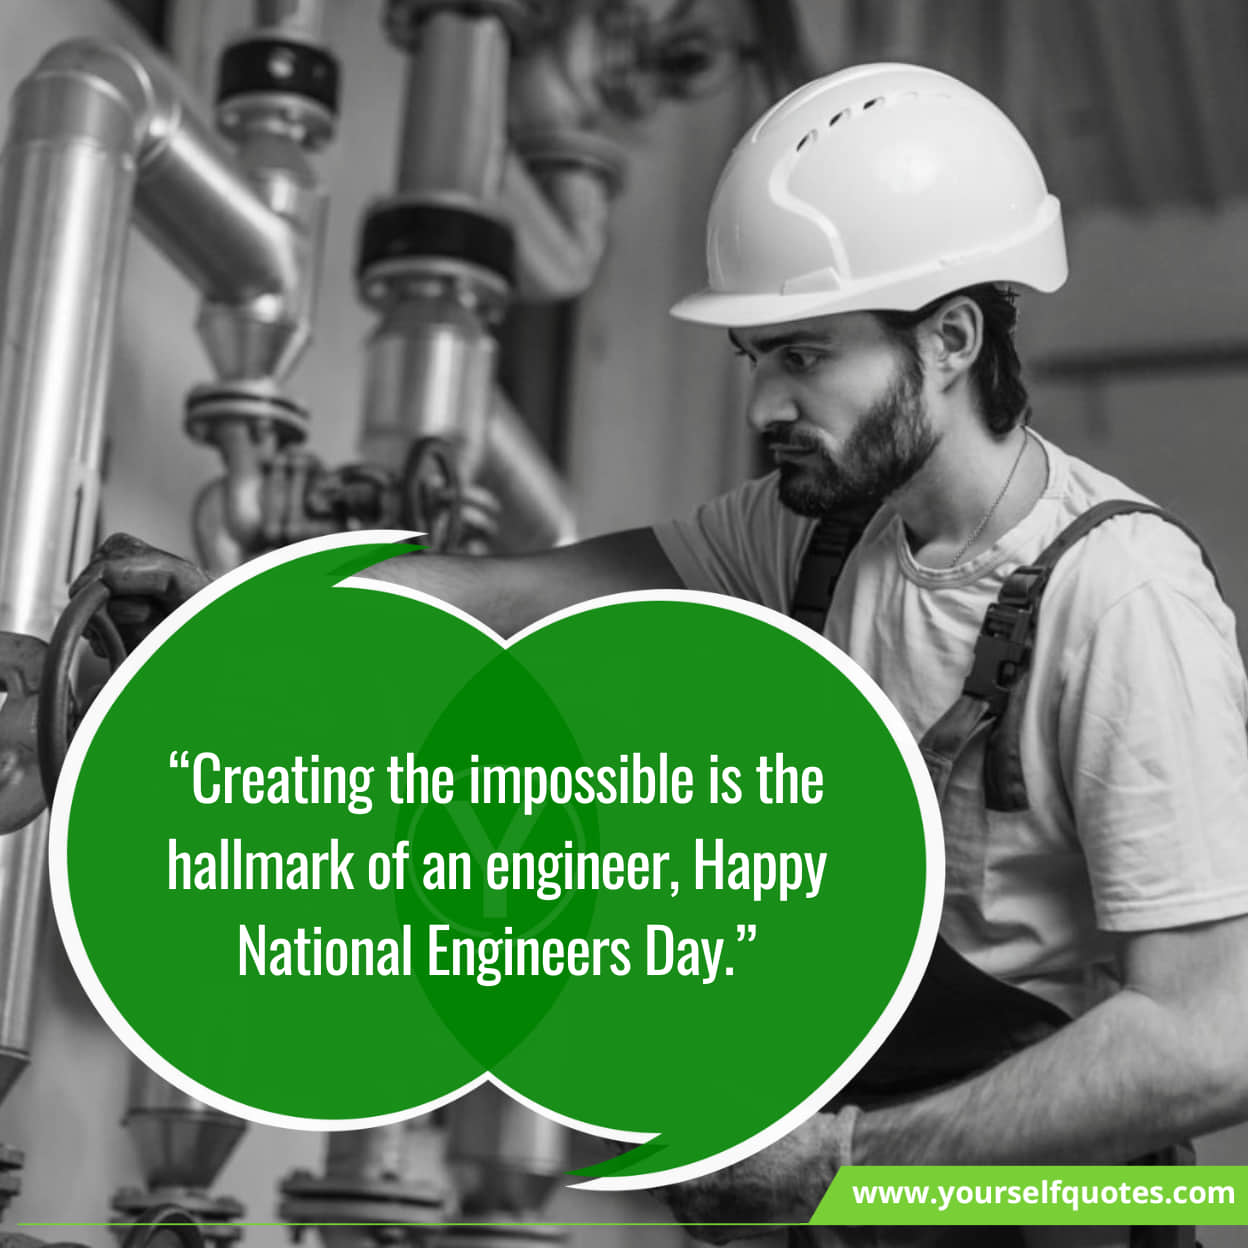 National Engineers Day Best Quotes